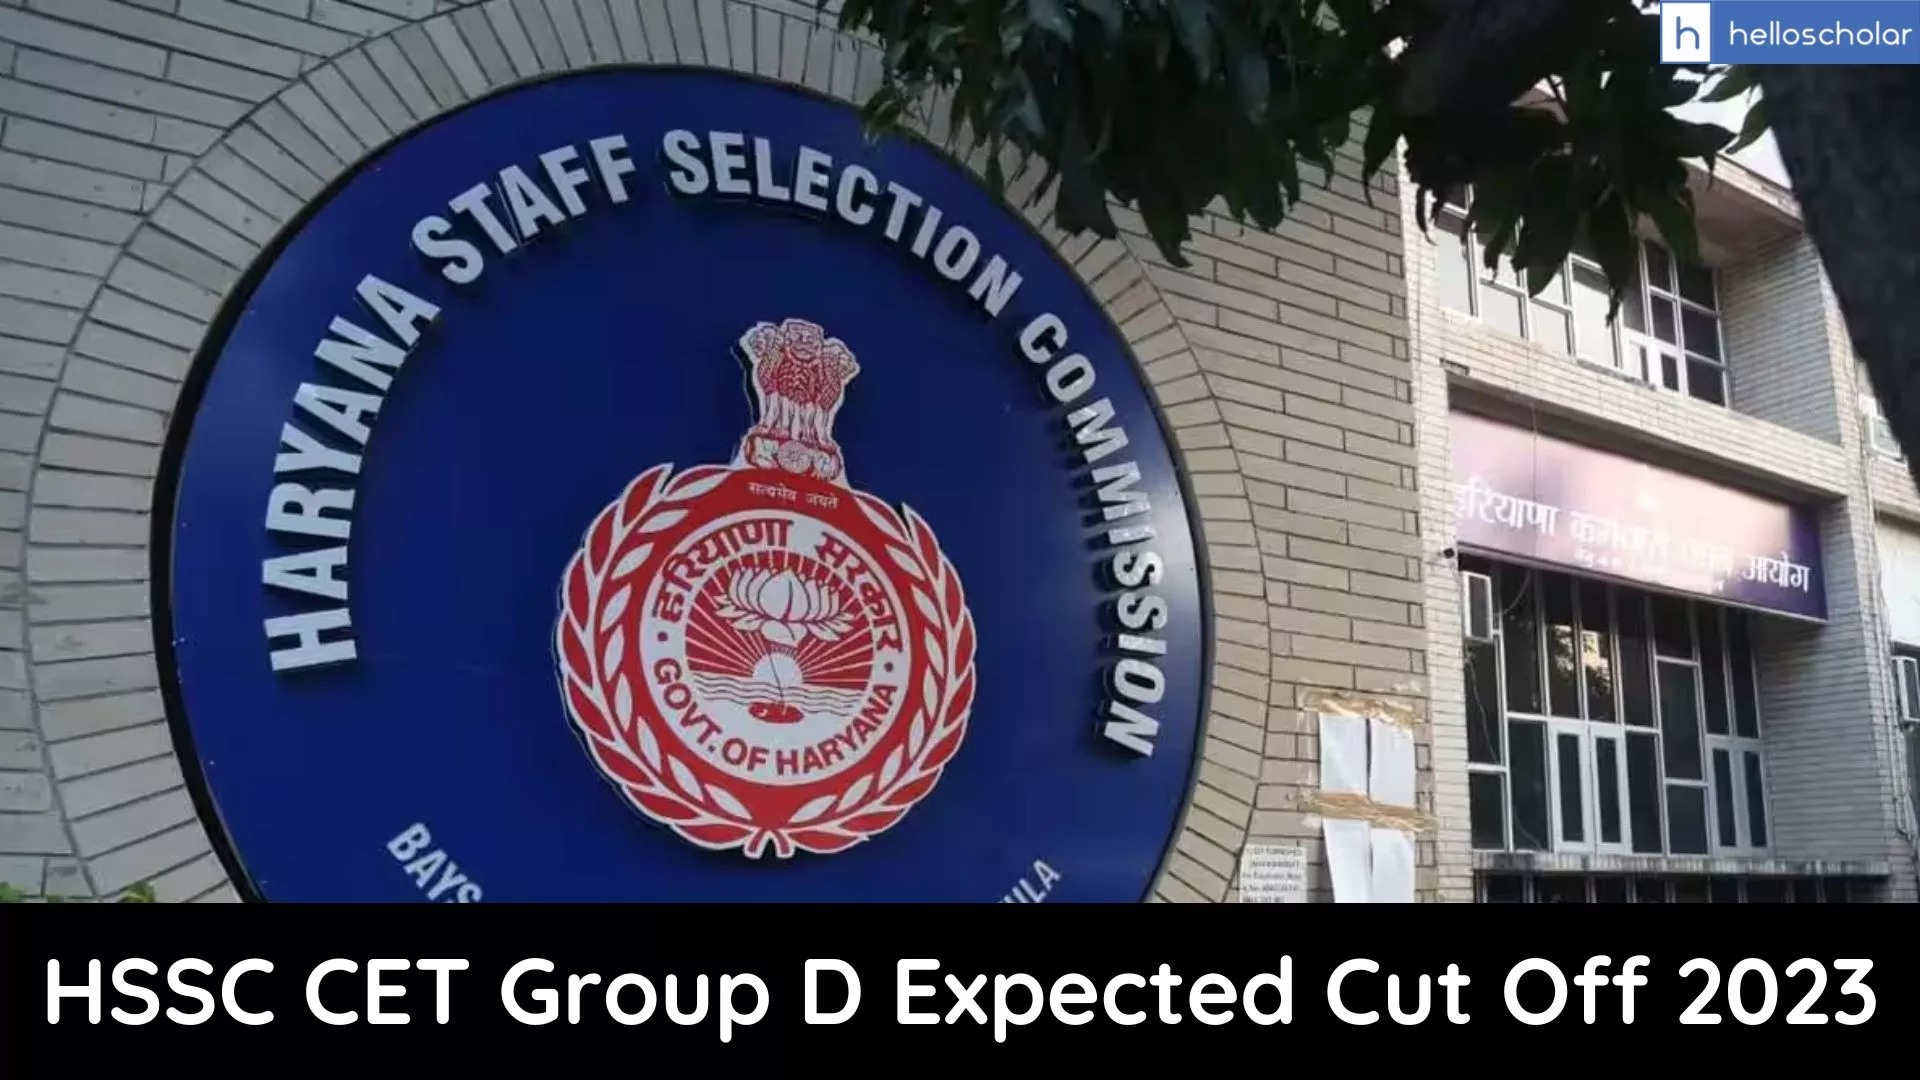 Haryana HSSC CET Group D Expected Cut Off 2023 and Category wise Previous Year Cut Off